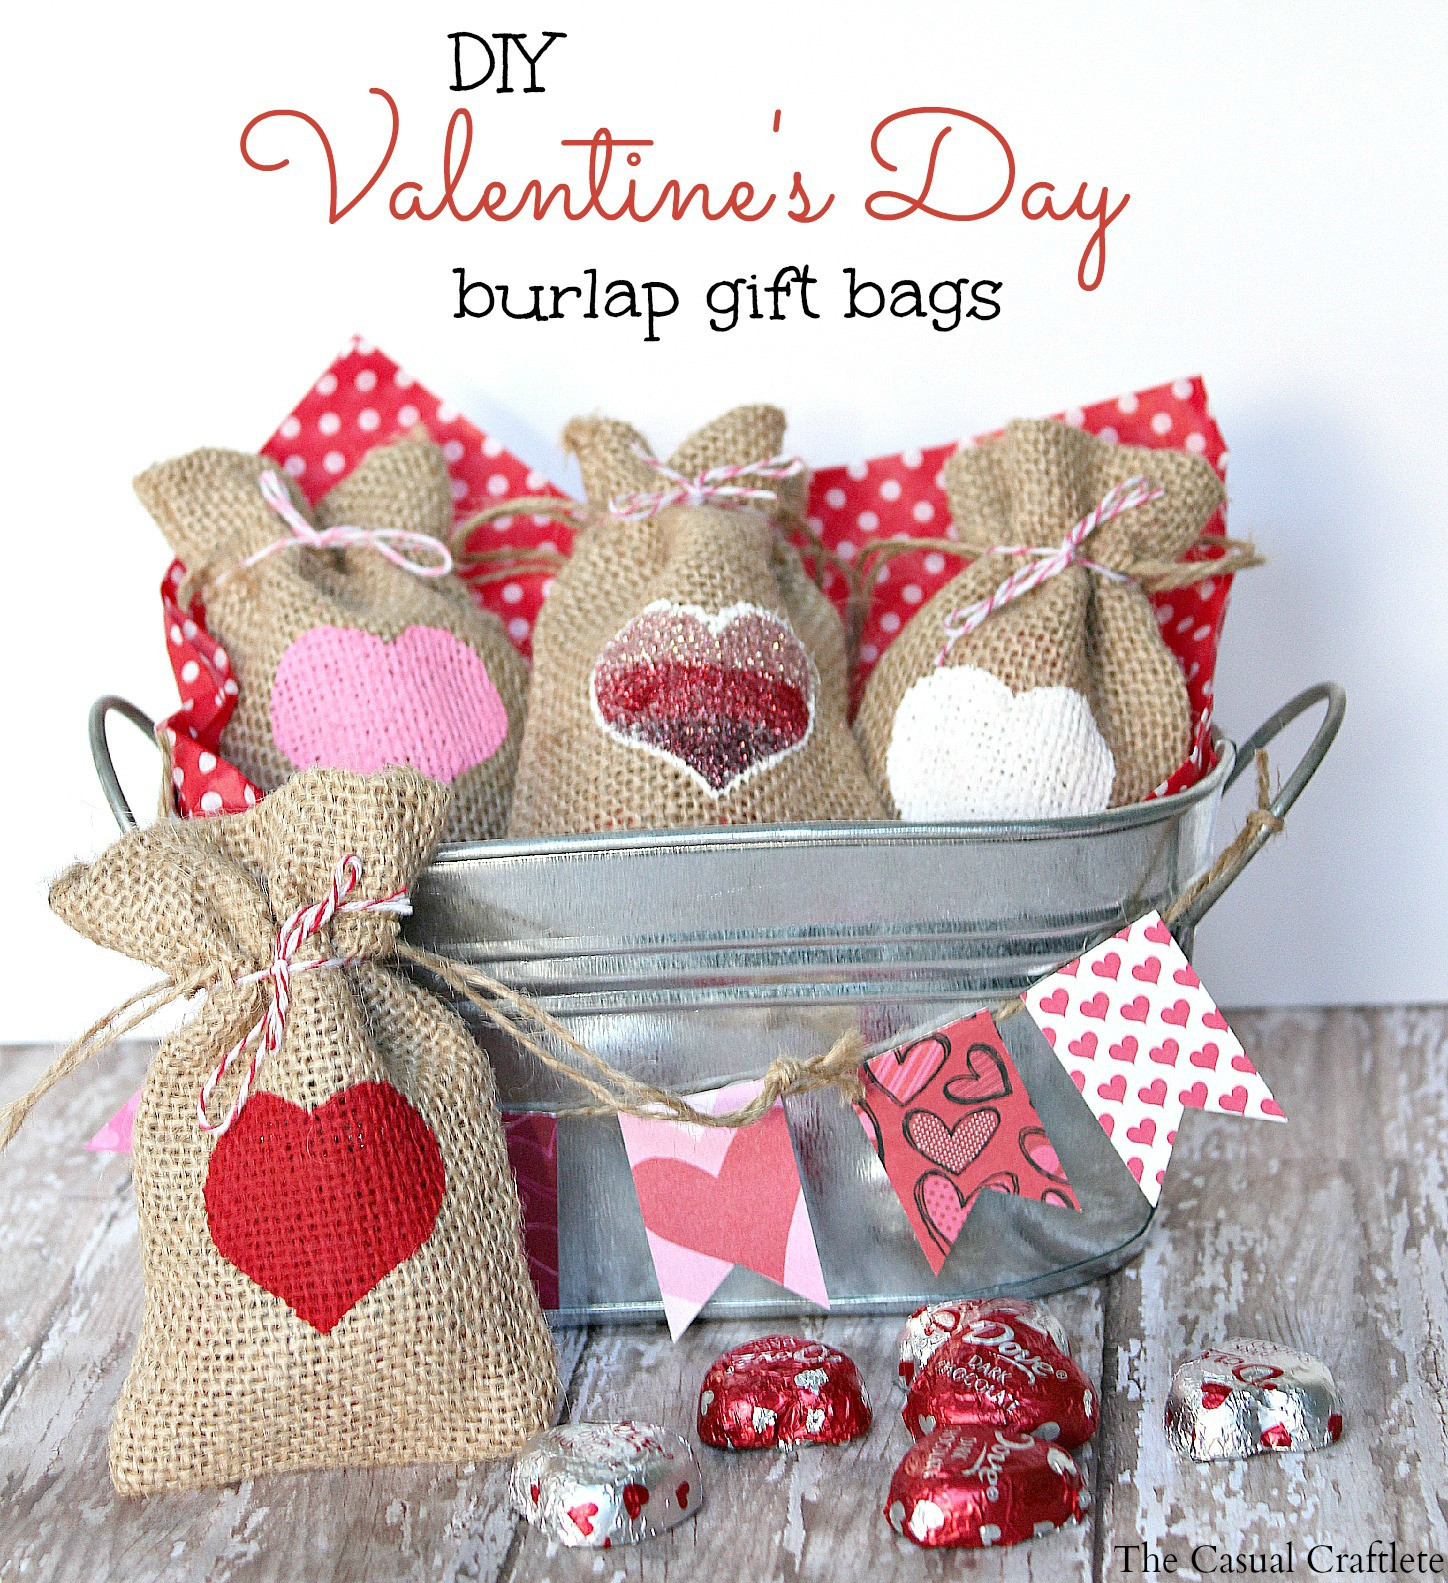 Valentines Day Home Made Gifts
 DIY Valentine s Day Burlap Gift Bags